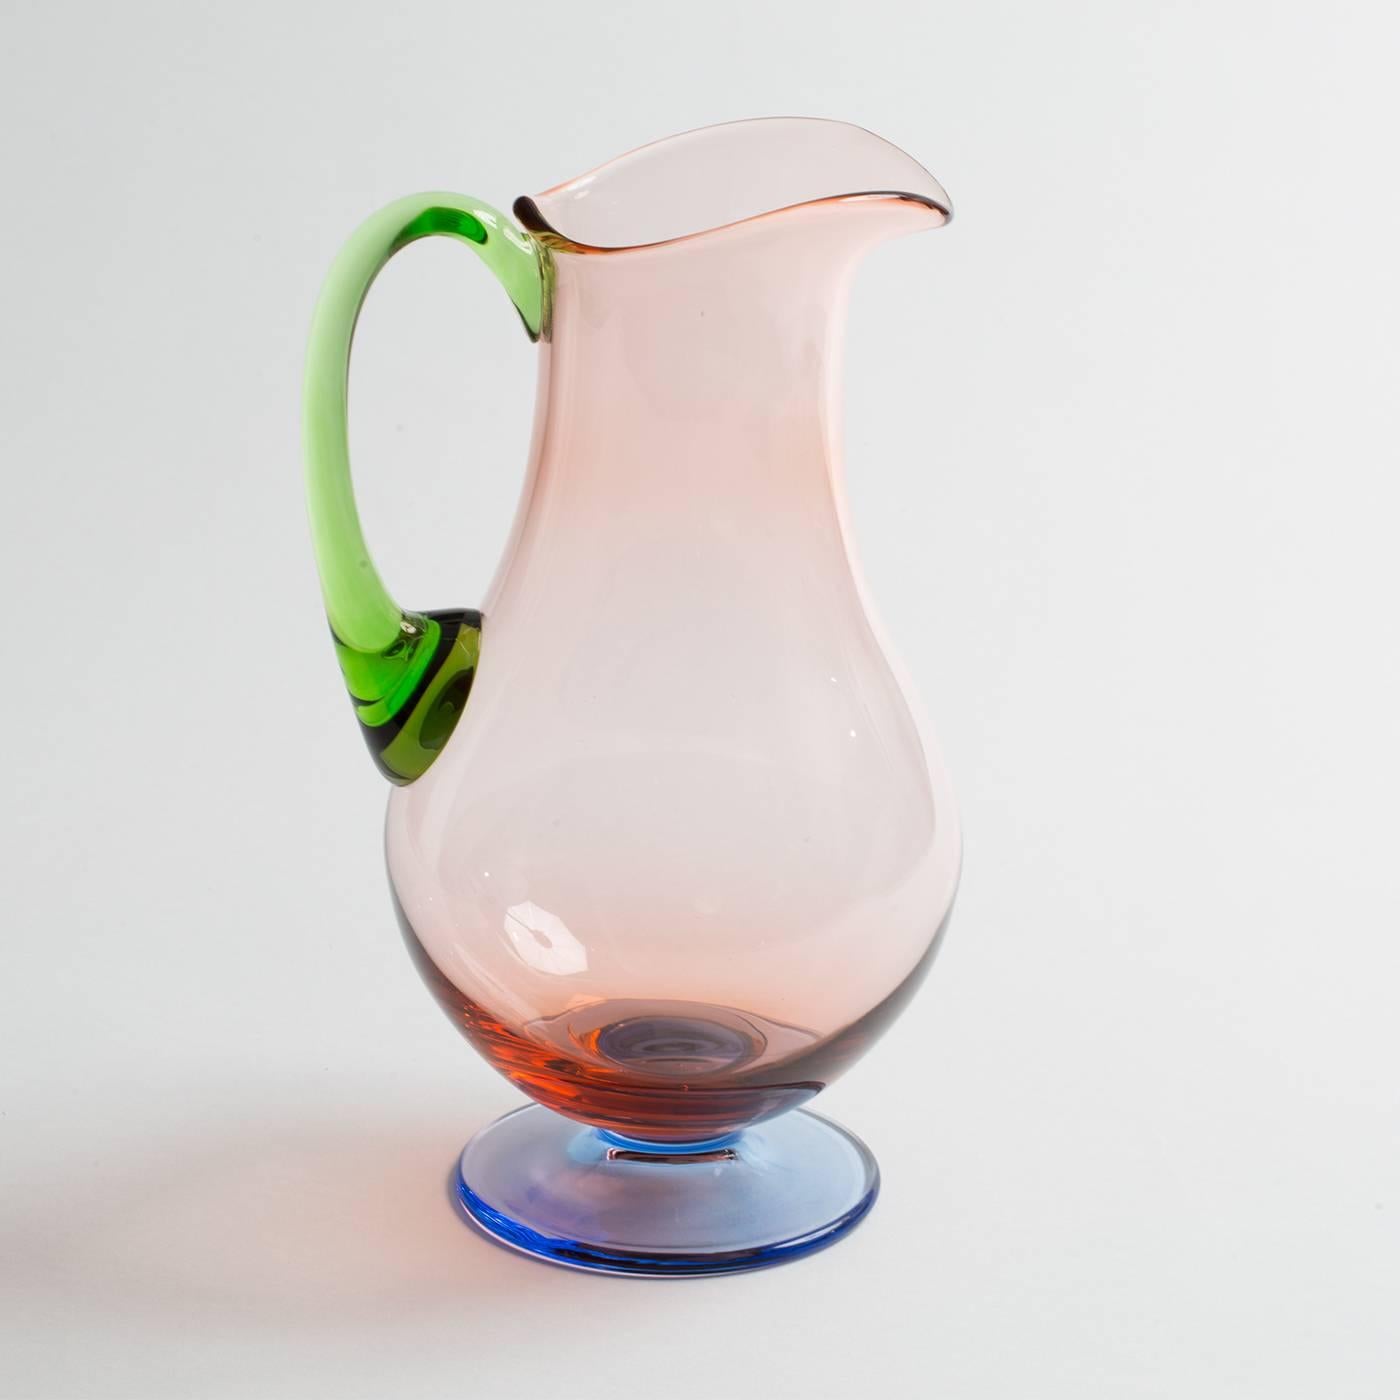 This exquisite set is comprised of six liquor glasses, six wine glasses and six flutes. Each glass is enhanced by vivid colors: pink for the body, green on the stem, and pale blue on the base. The pitcher has a body in pink, the base in pale blue